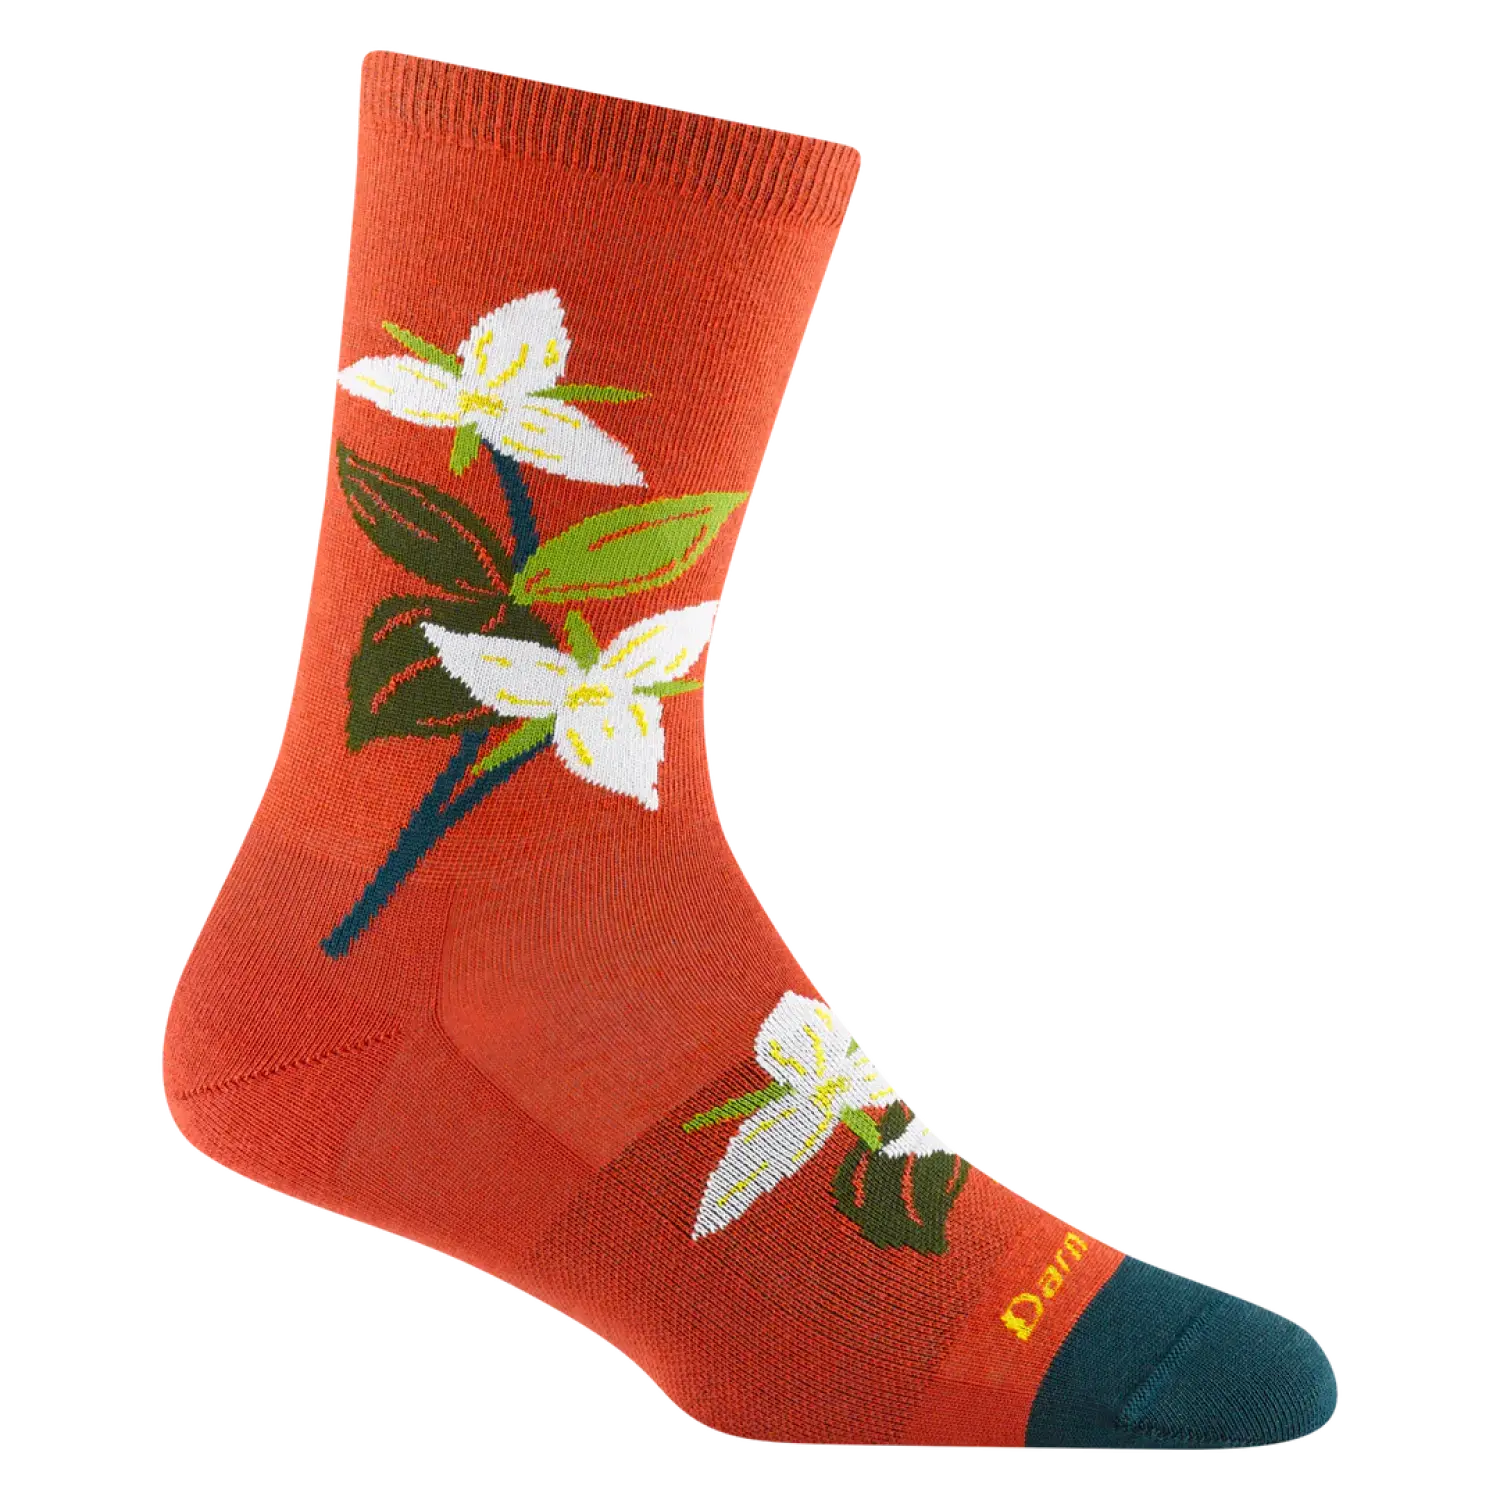 Darn Tough Women's Blossom Crew Lightweight Lifestyle Sock shown in the Tomato color option.